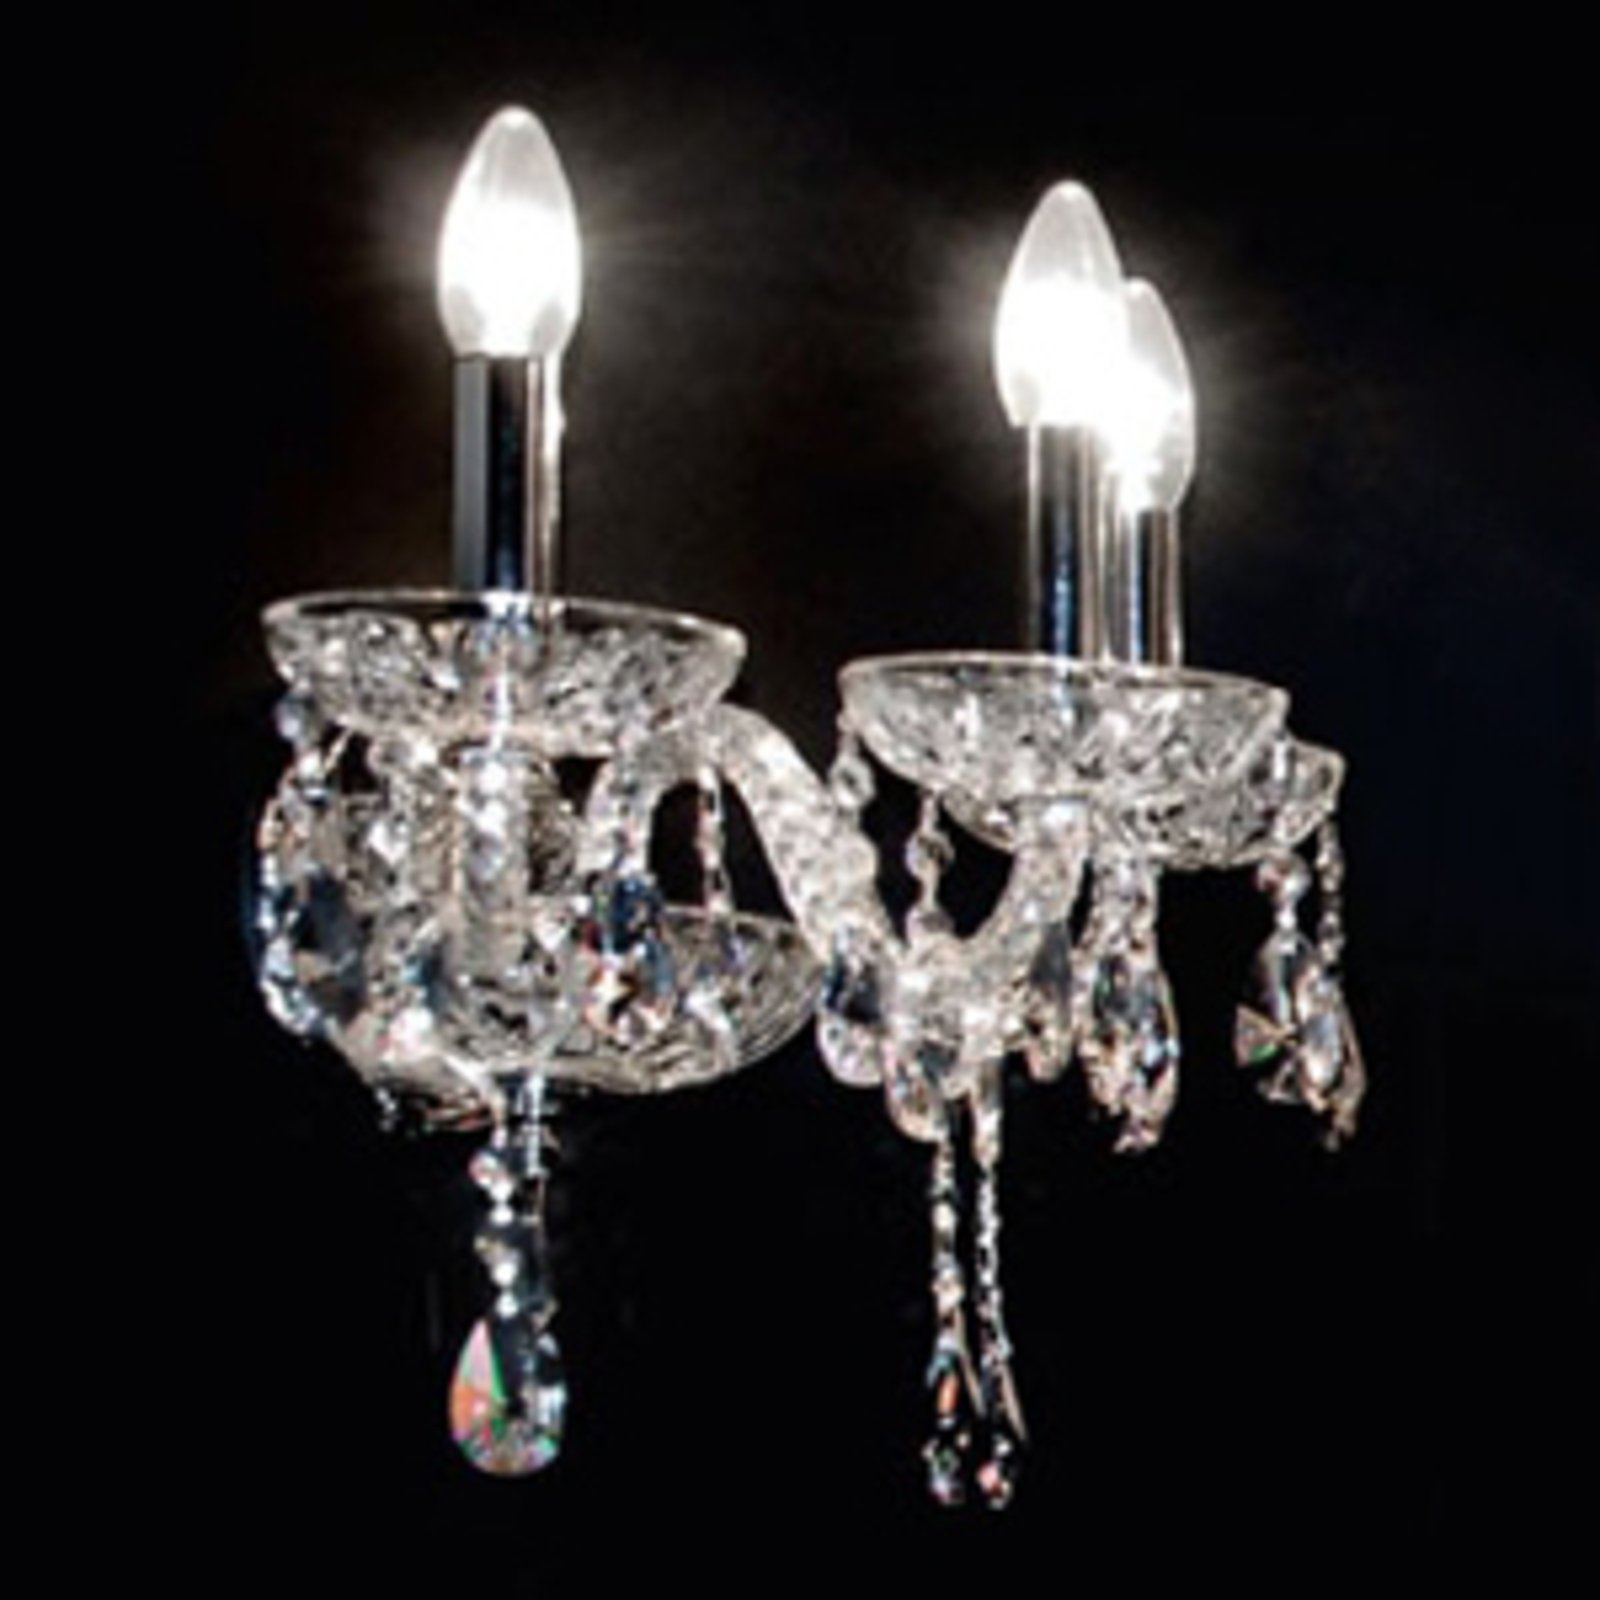 Exquisite crystal wall light Oldies But Goldies